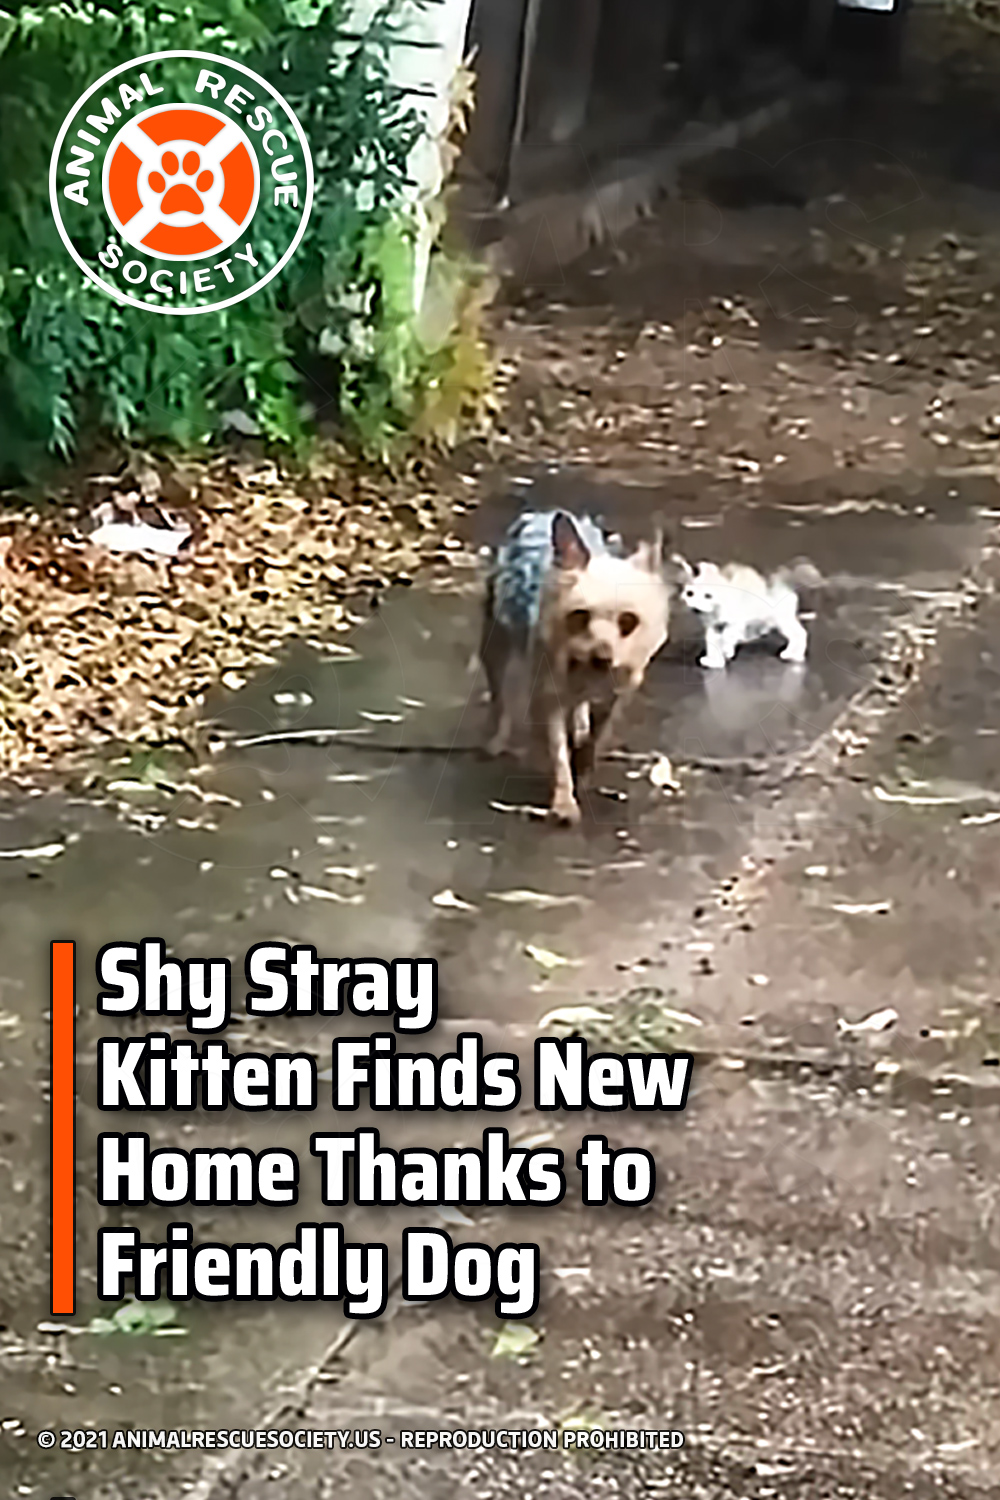 Shy Stray Kitten Finds New Home Thanks to Friendly Dog